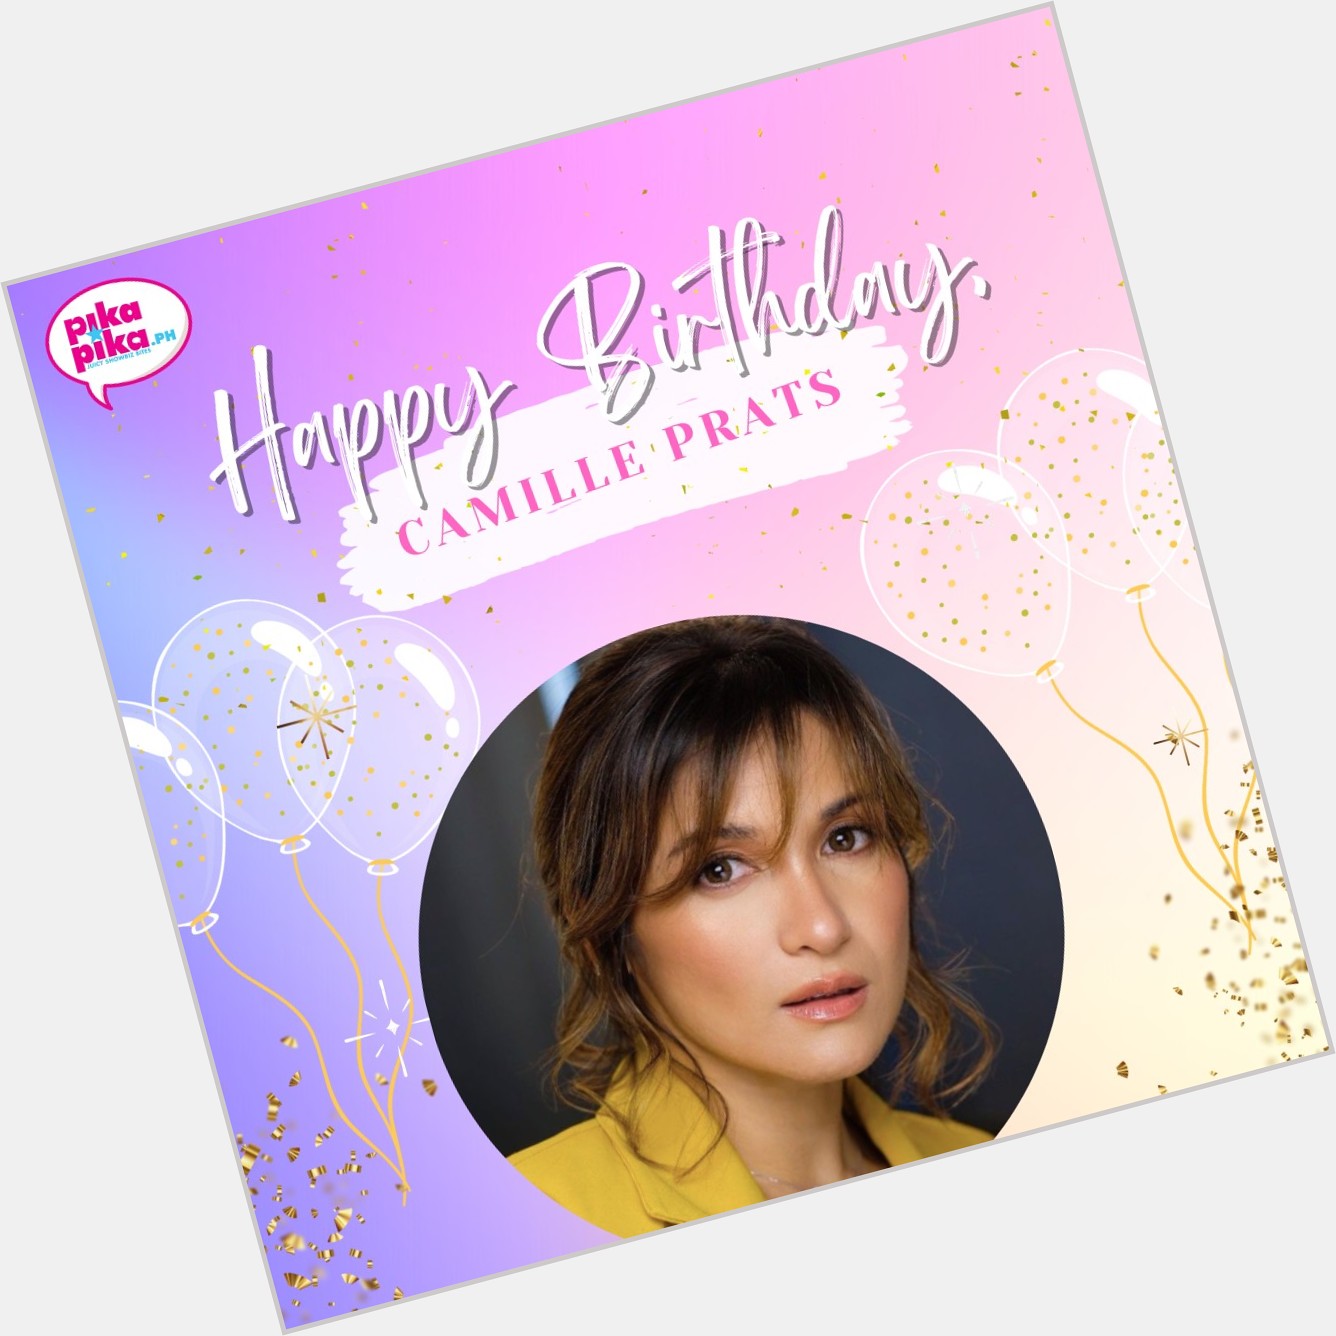 Happy birthday, Camille Prats! May your special day be filled with love and cheers.    